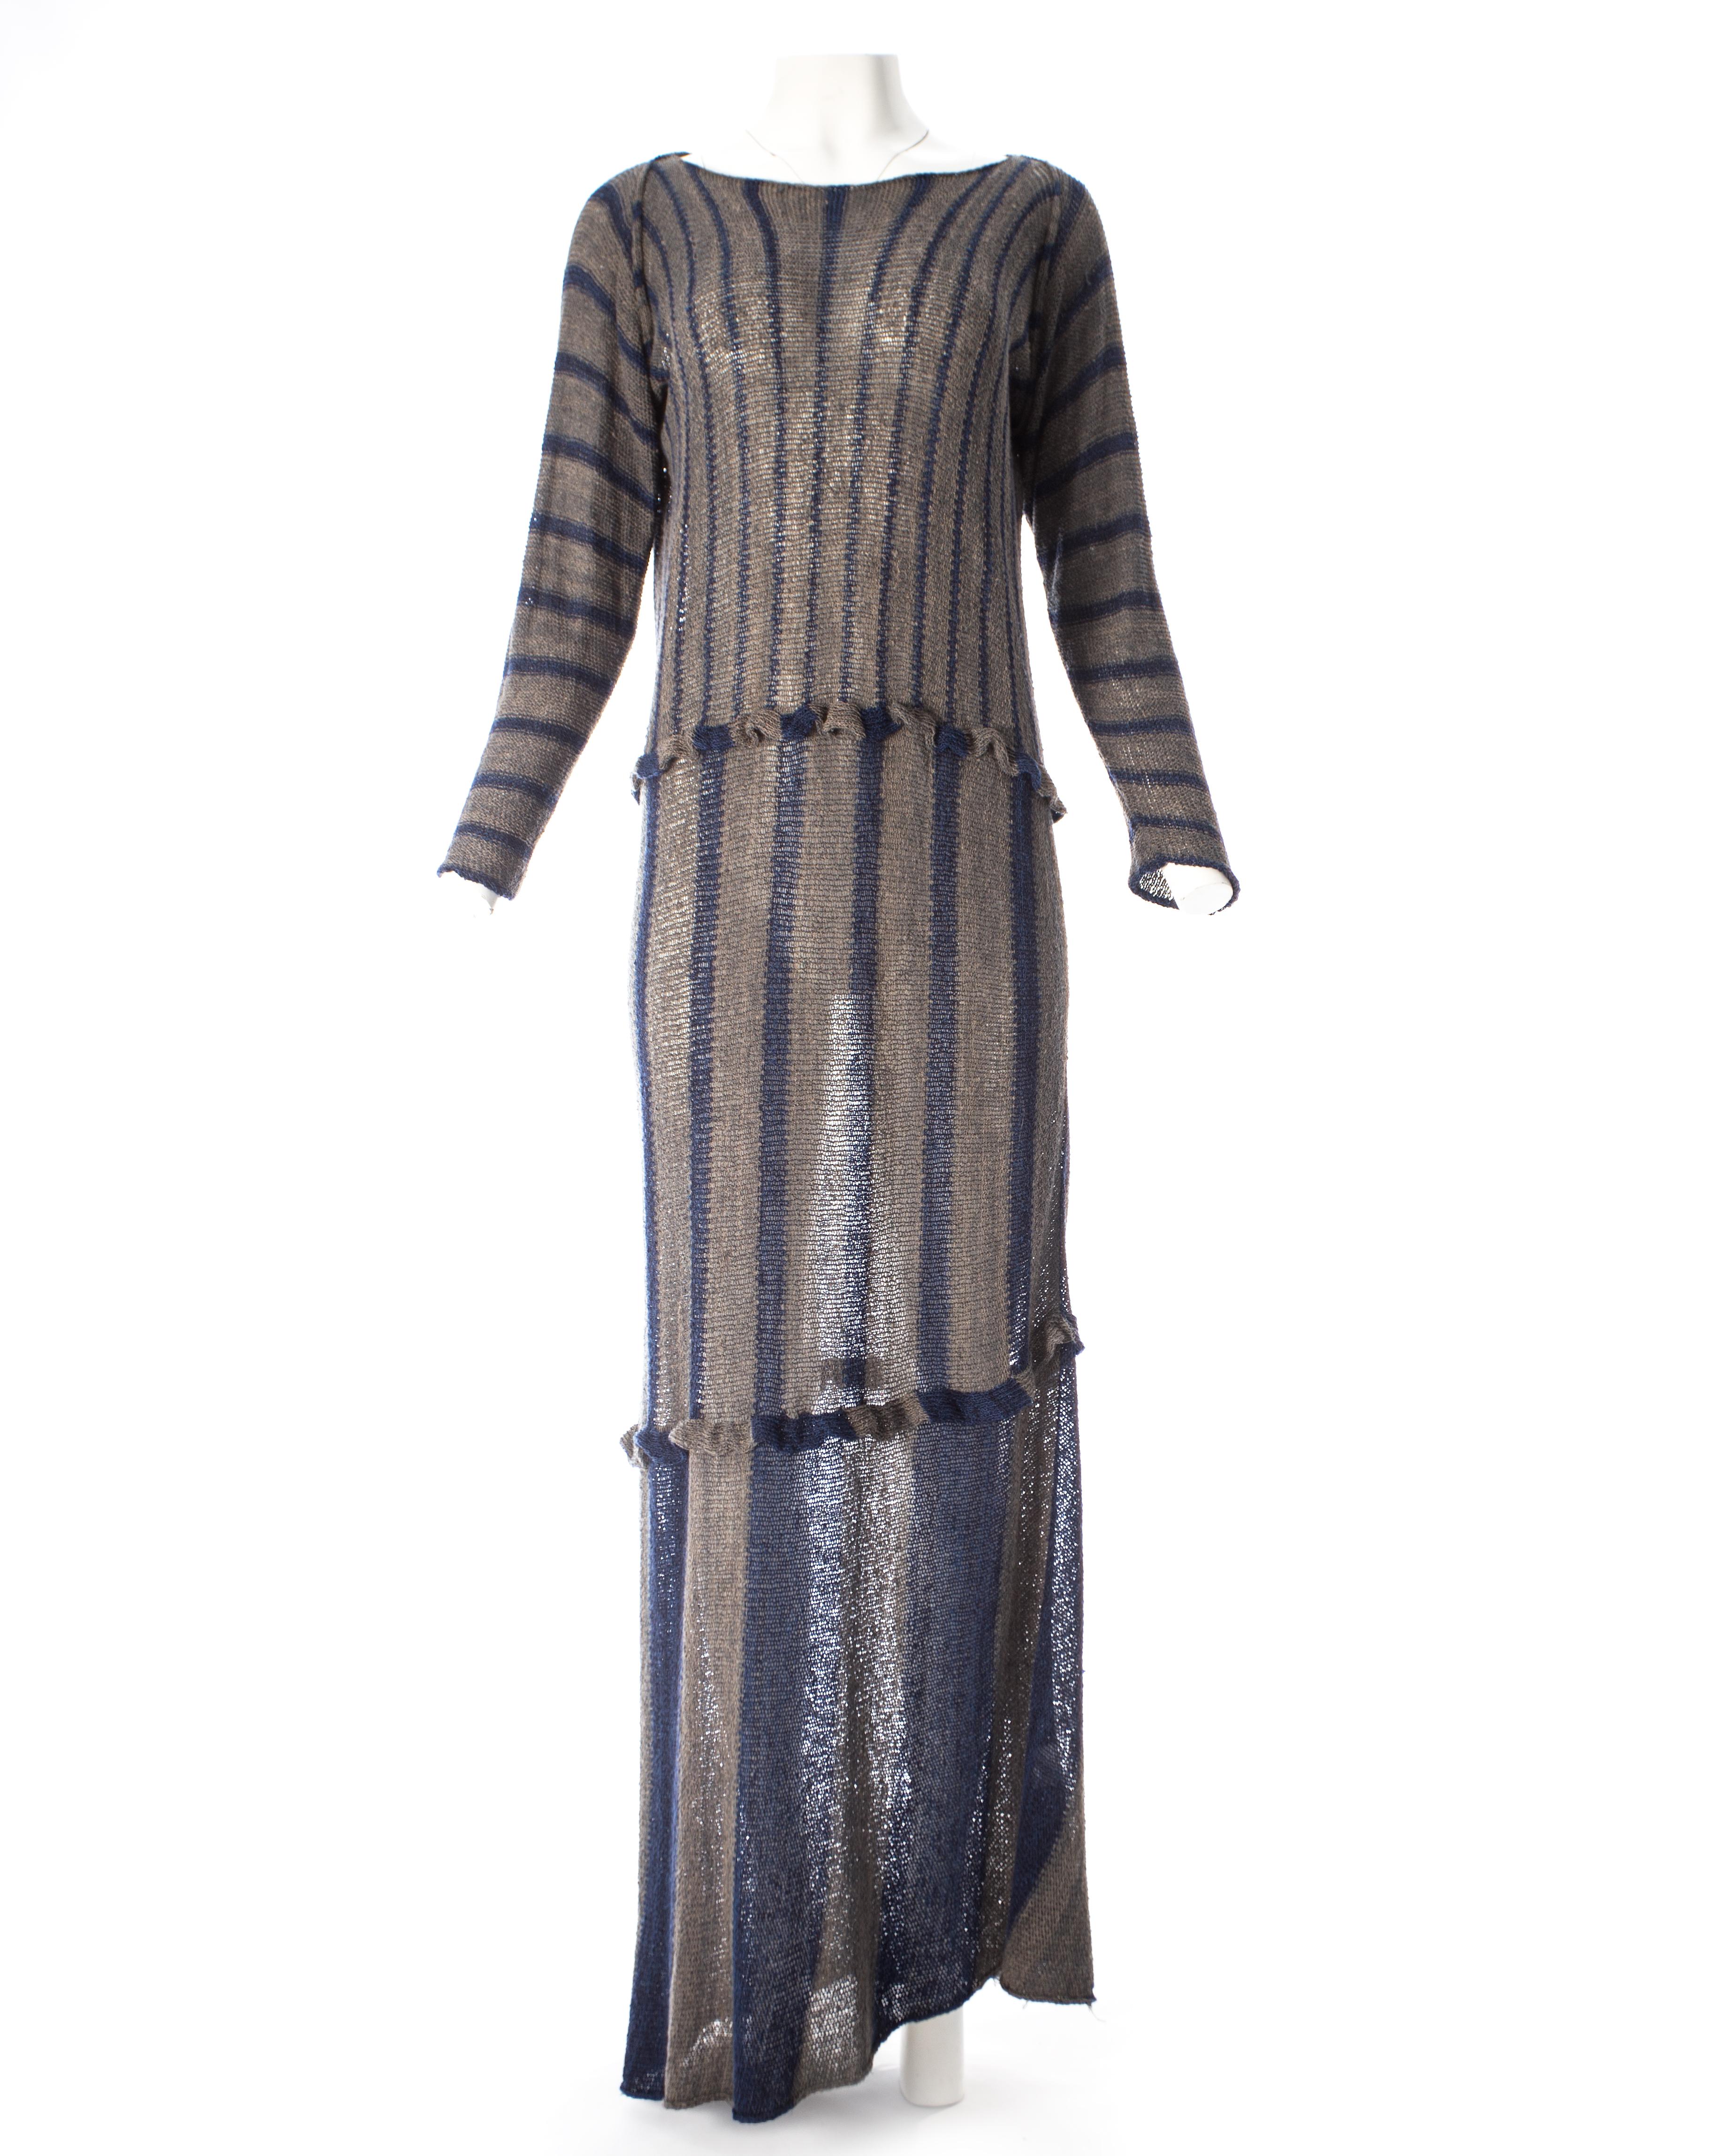 Issey Miyake striped knitted maxi dress

Spring-Summer 1984